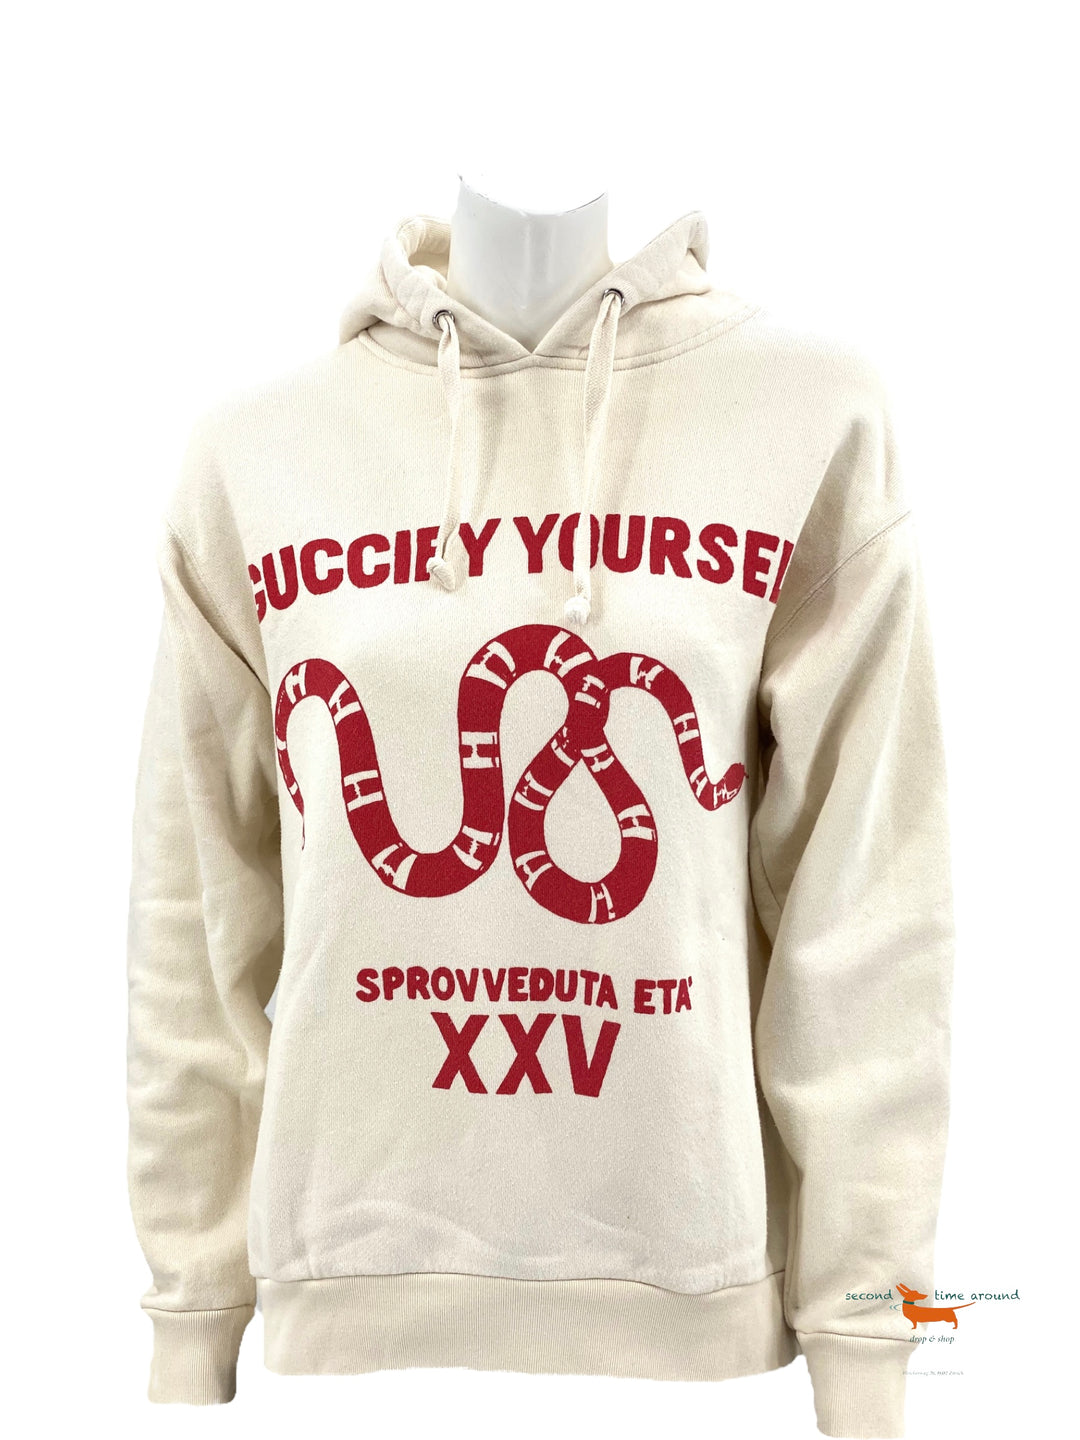 Gucci "Guccify Yourself" print Hoodie